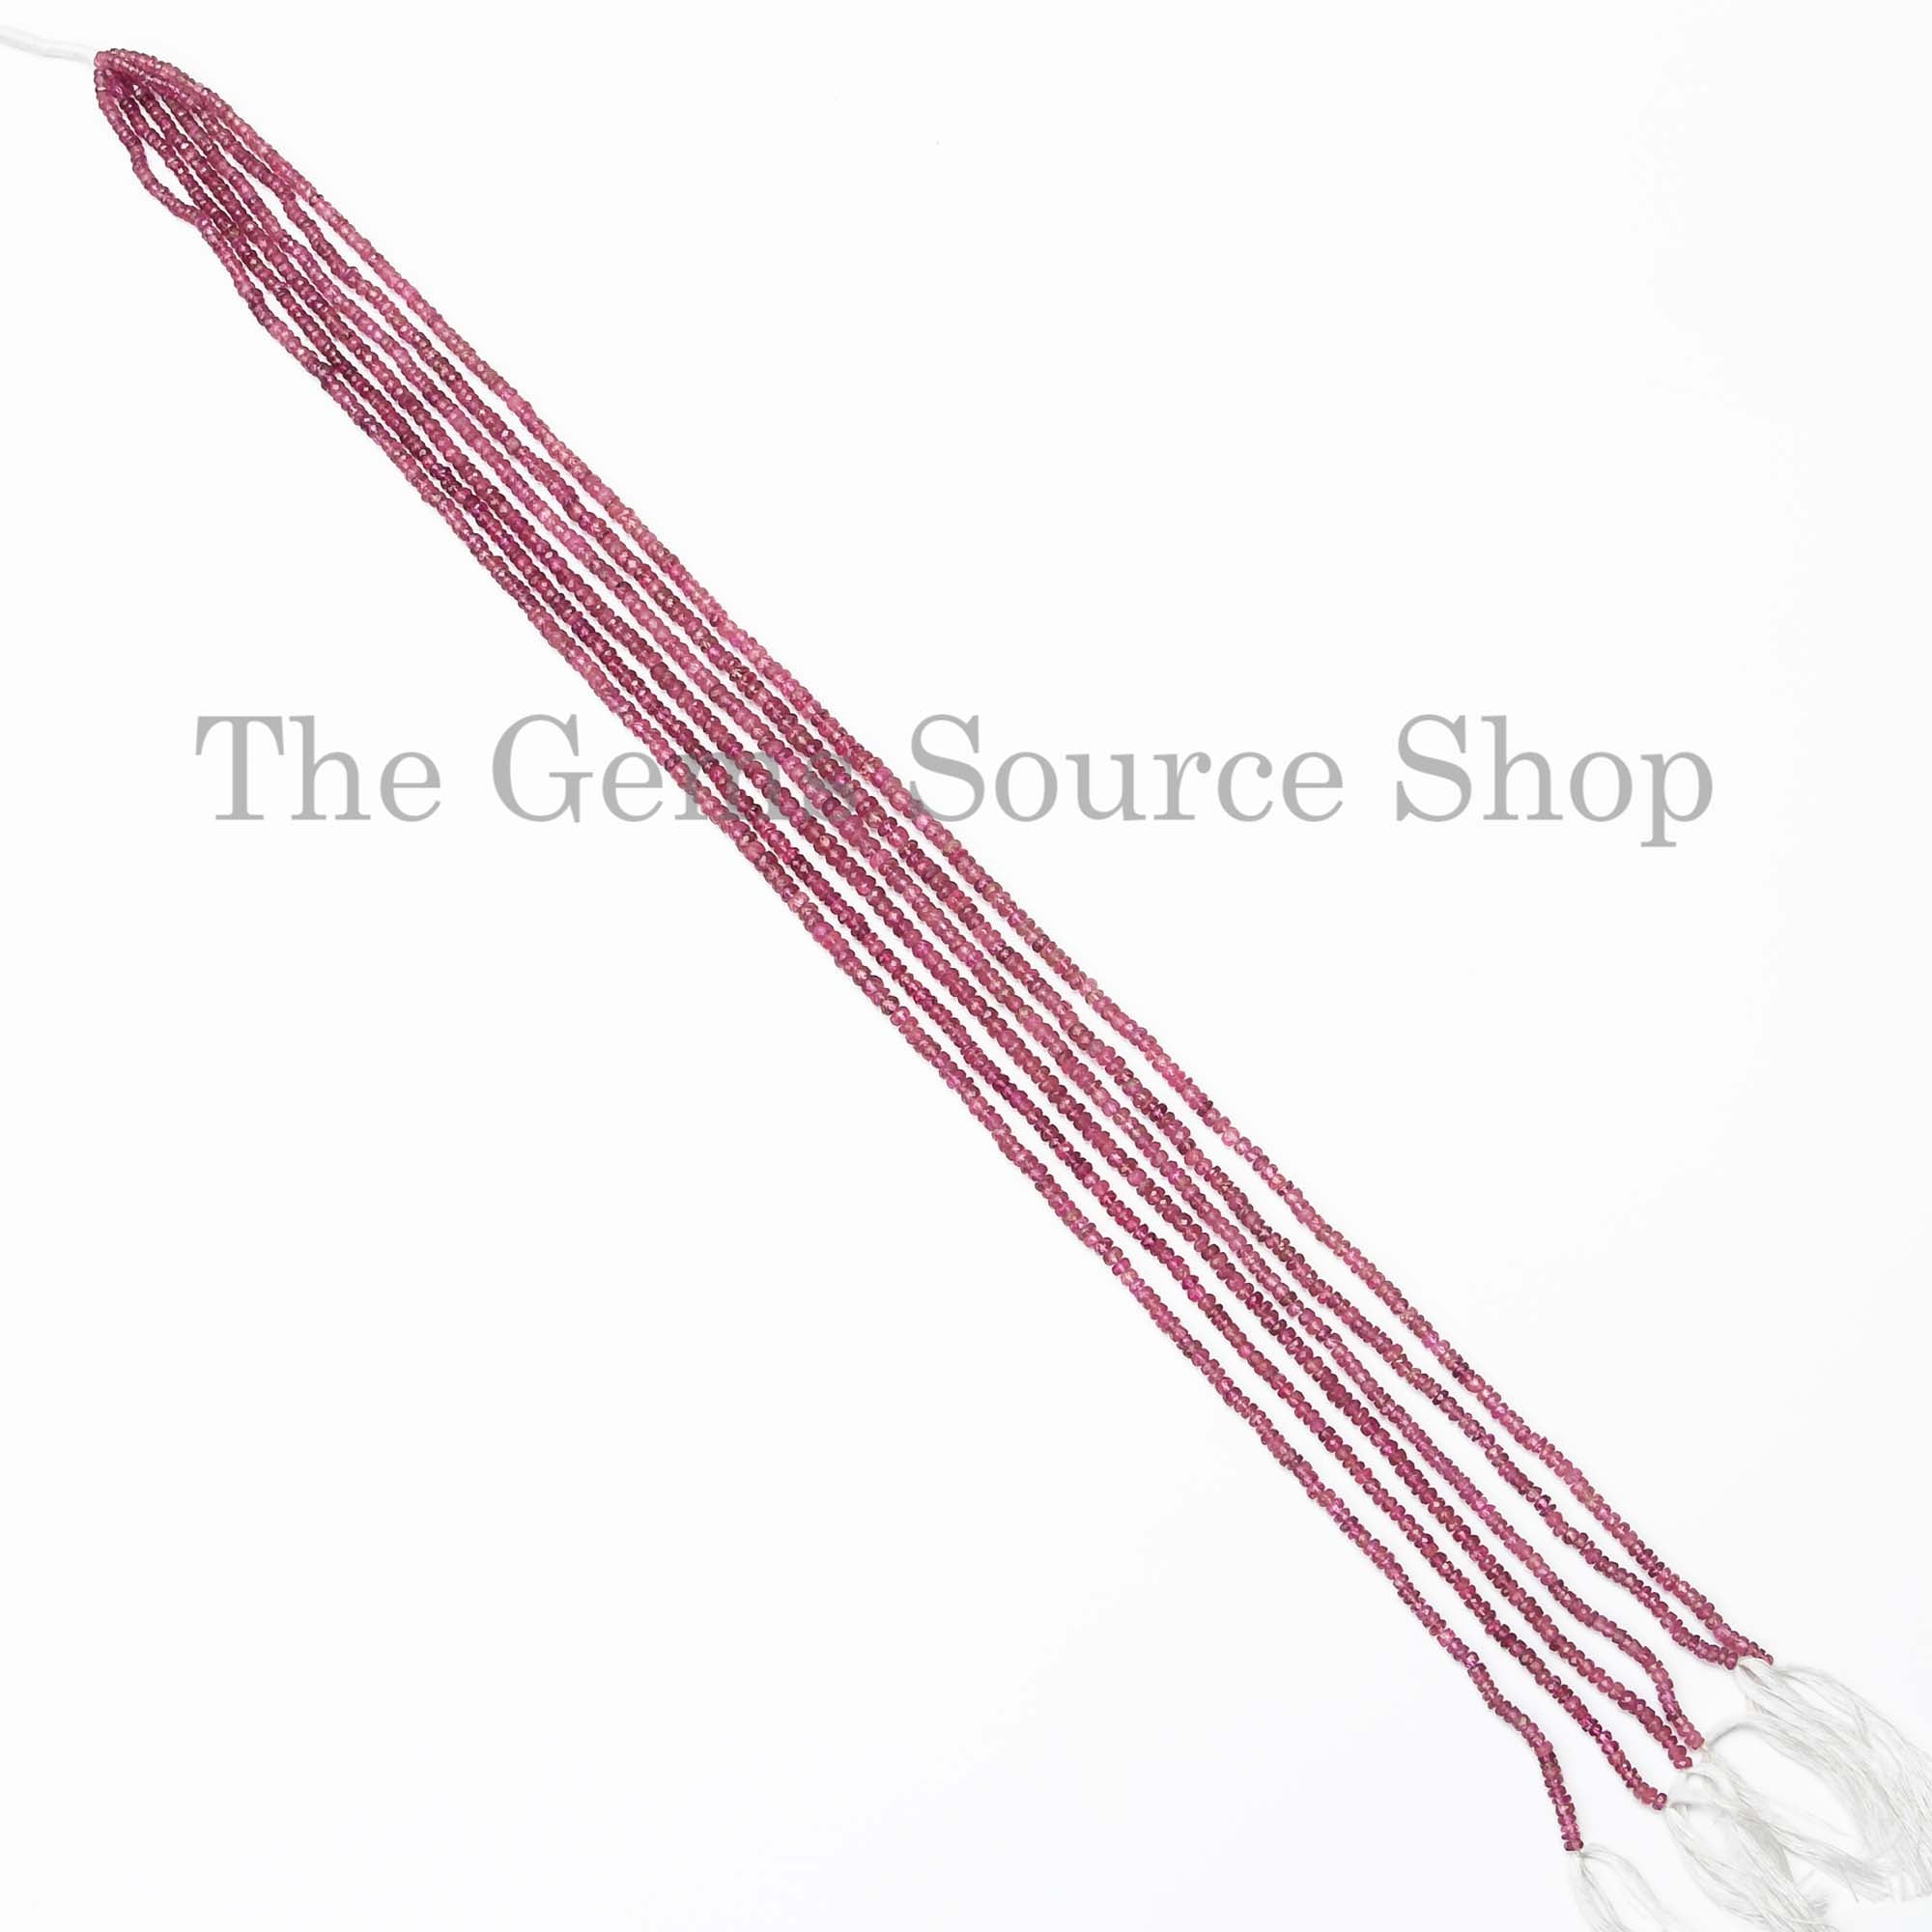 New Arrival 3-3.5mm Rubellite Tourmaline Faceted Rondelle Beads, Rubellite Faceted Beads